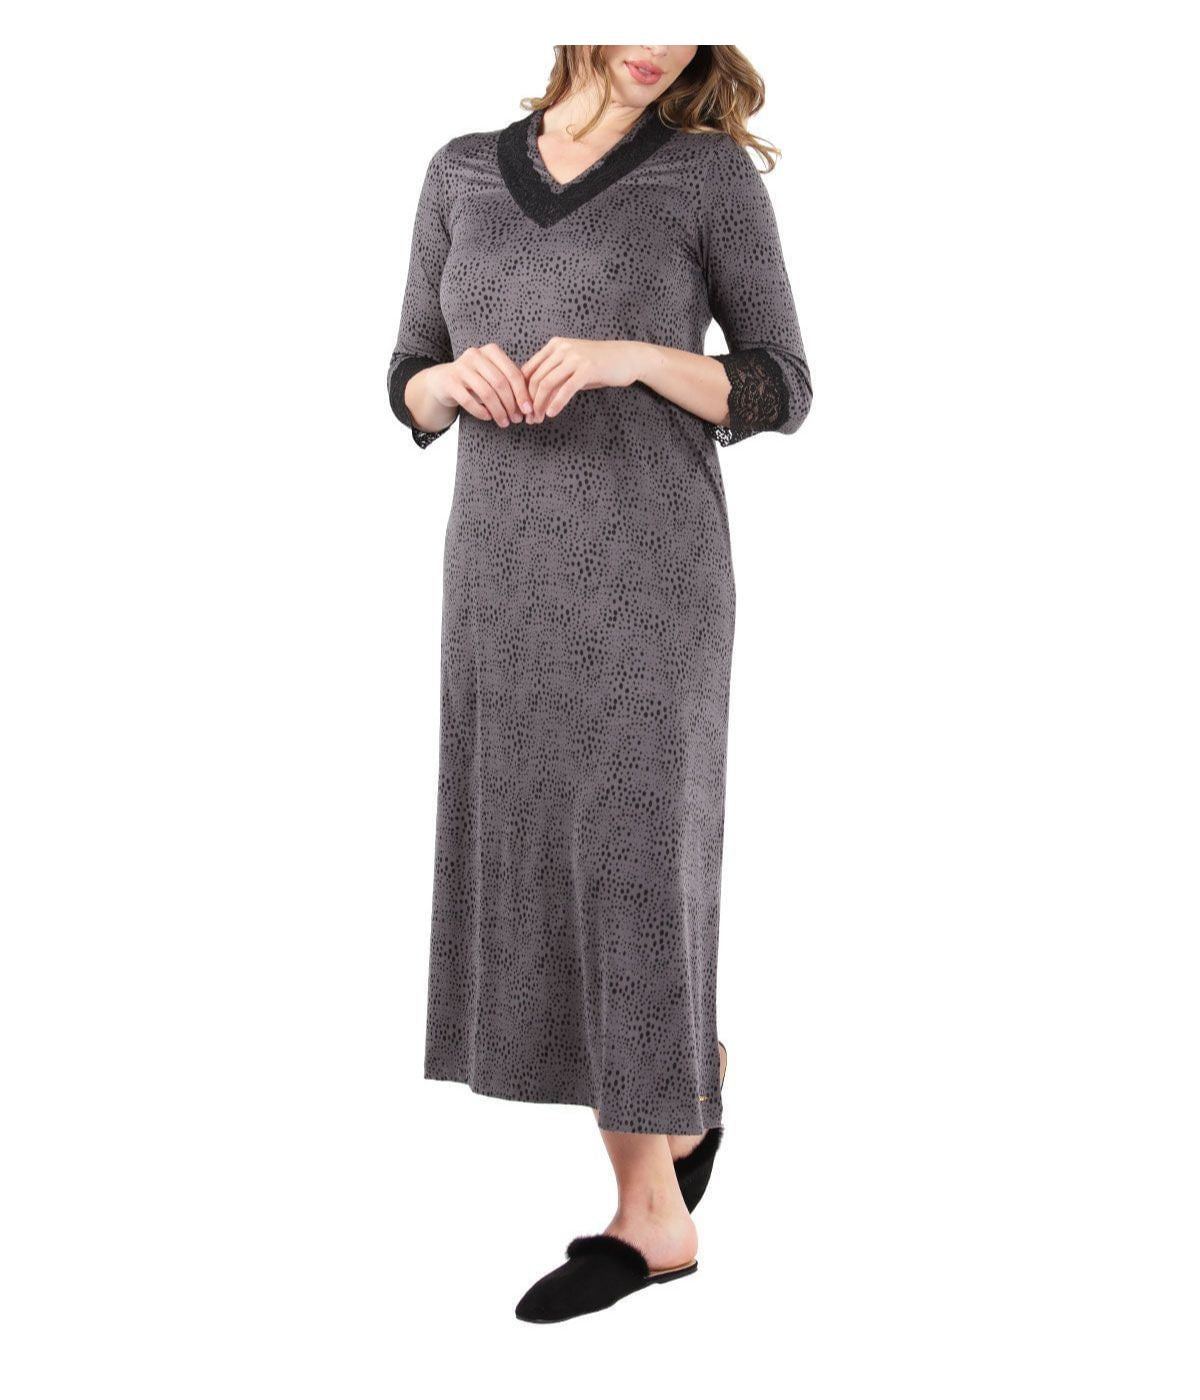 Women's Three Quarter Sleeve Nightgown with Lace Trim Animal Print